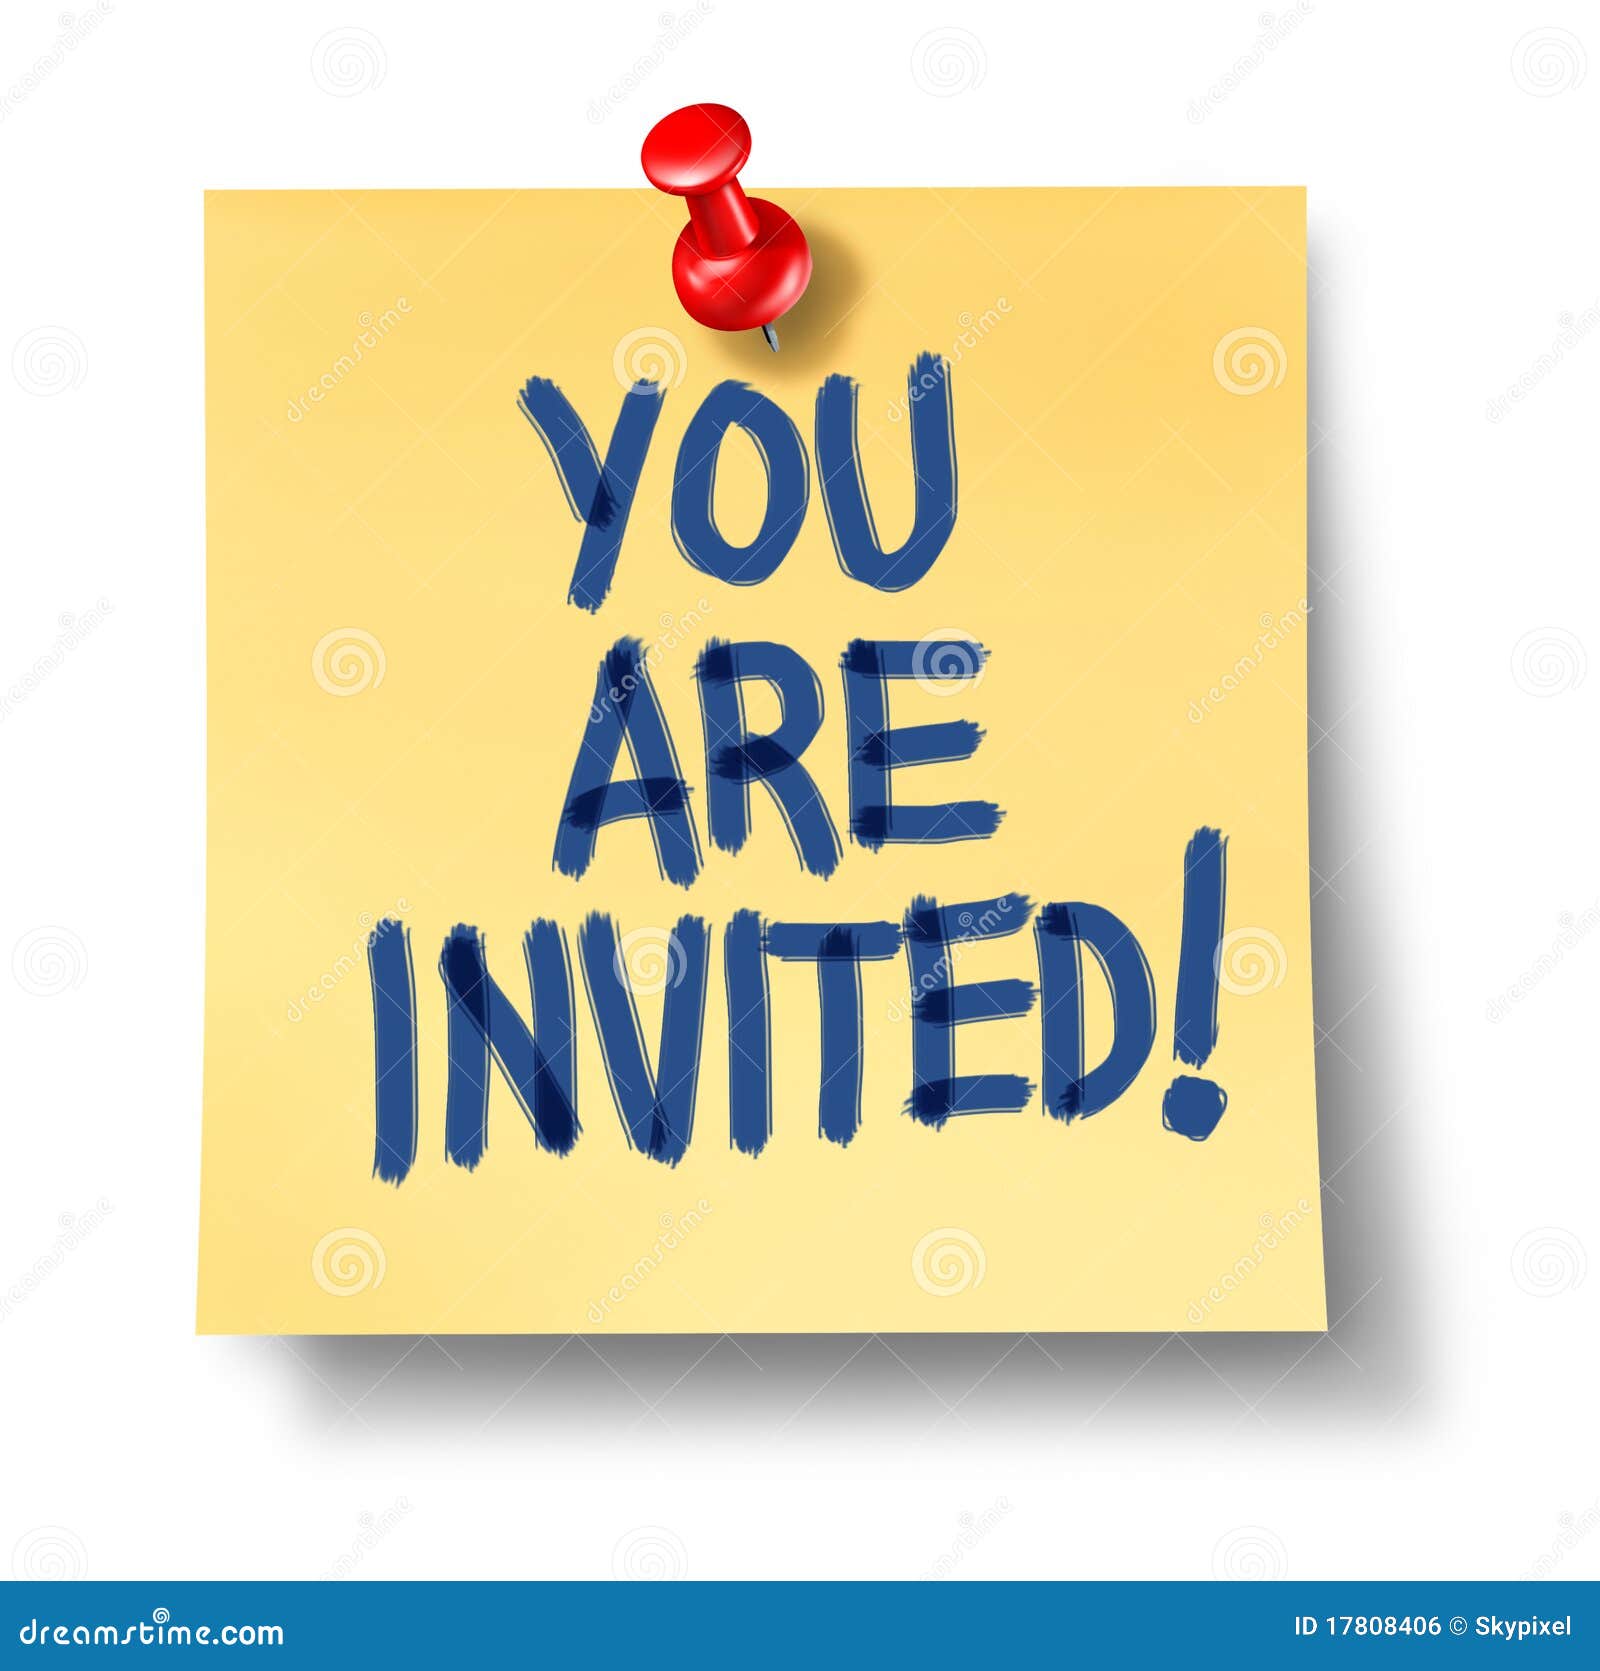 you're invited clipart free - photo #7